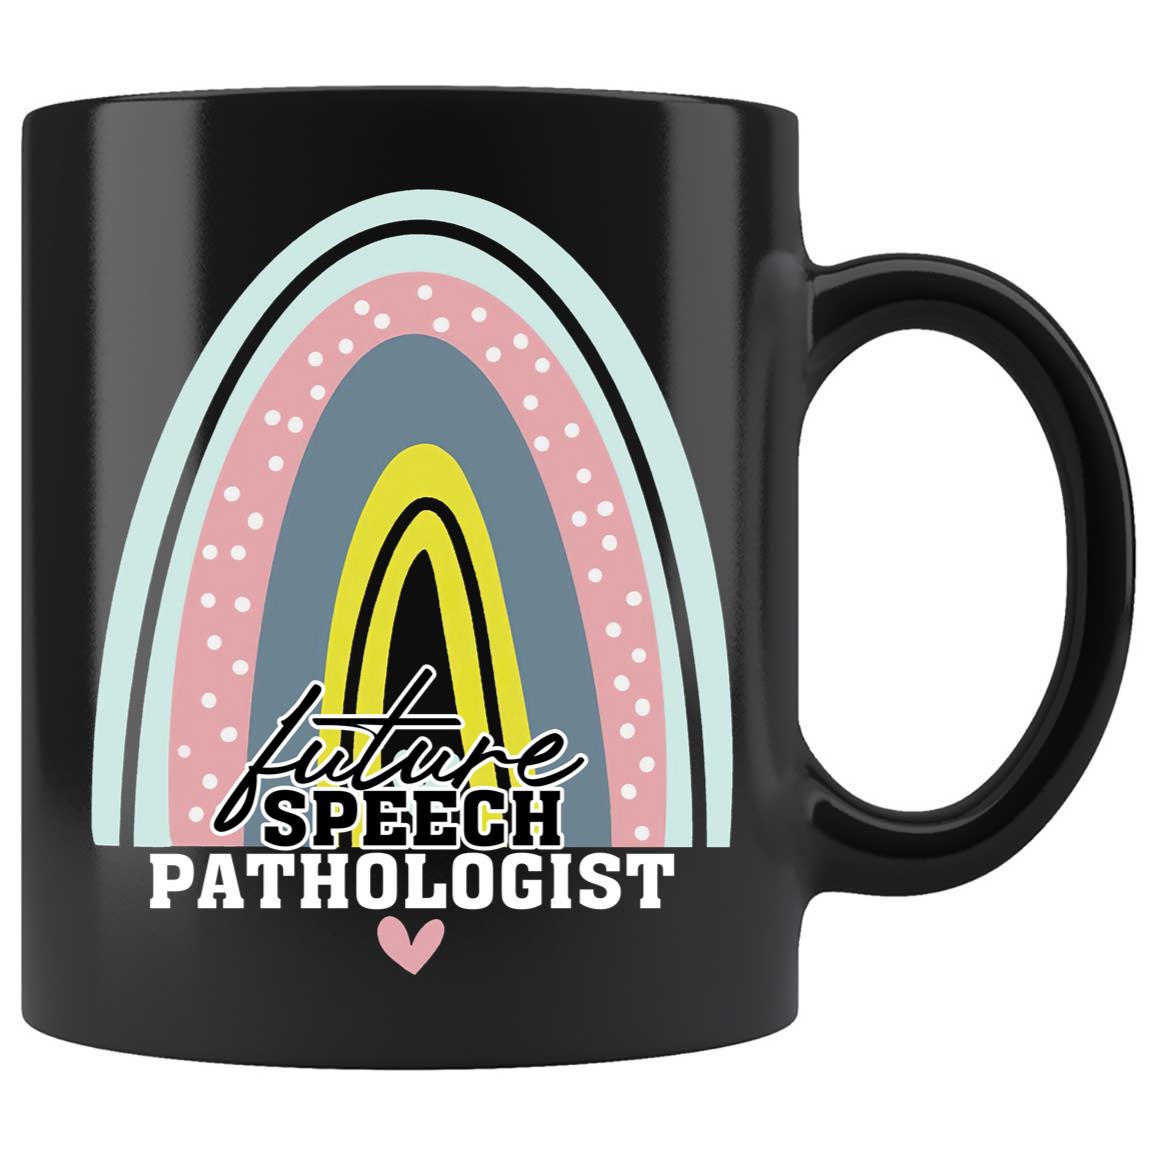 USB Port Quote Funny Coffee or Tea Mug – Neurons Not Included™